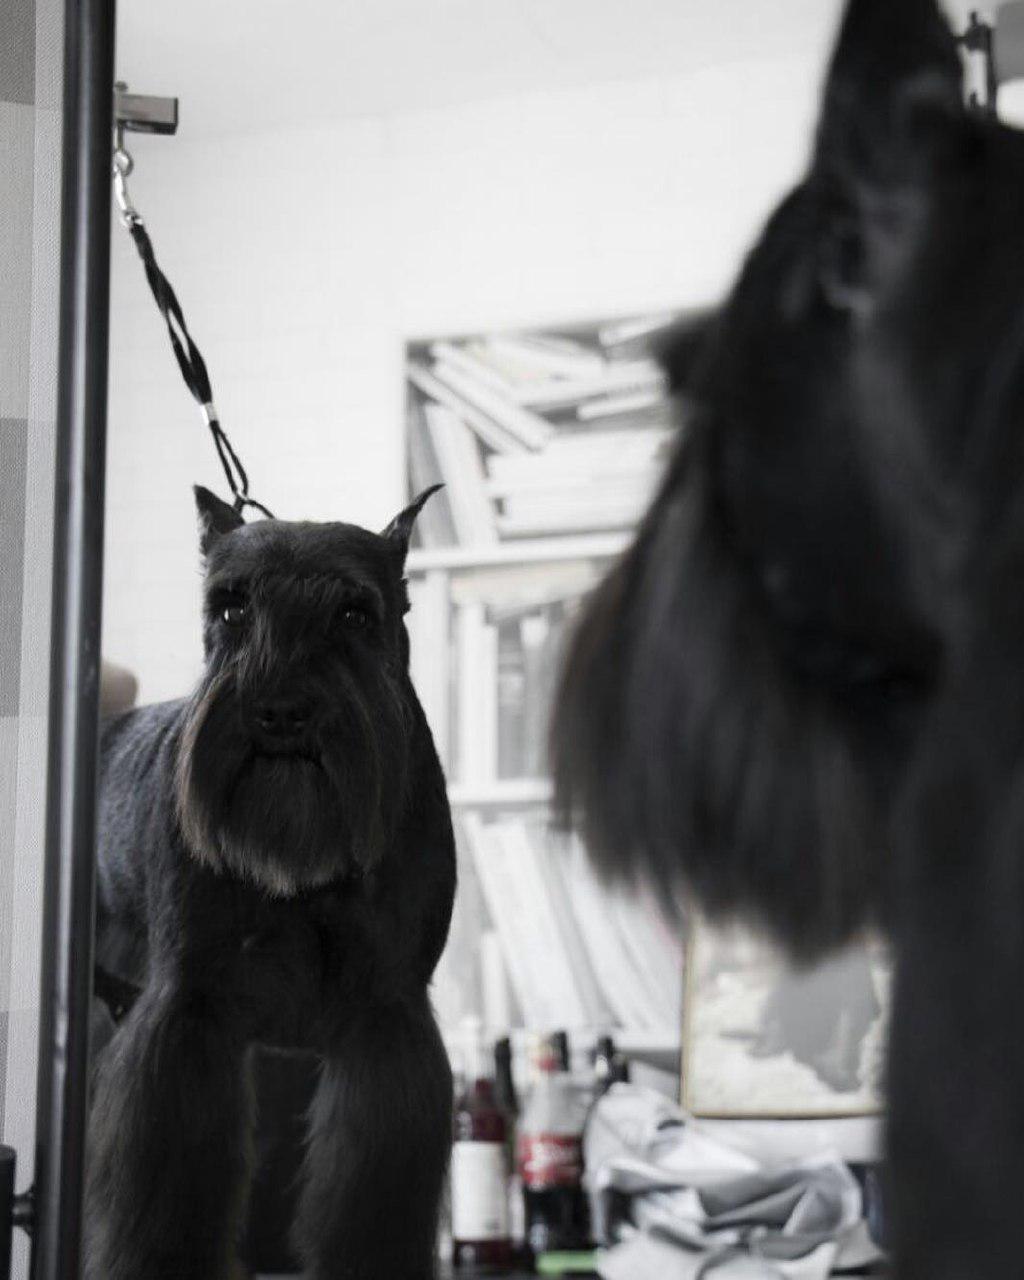 A freshly groom black Schnauzer staring at his reflection on the mirror